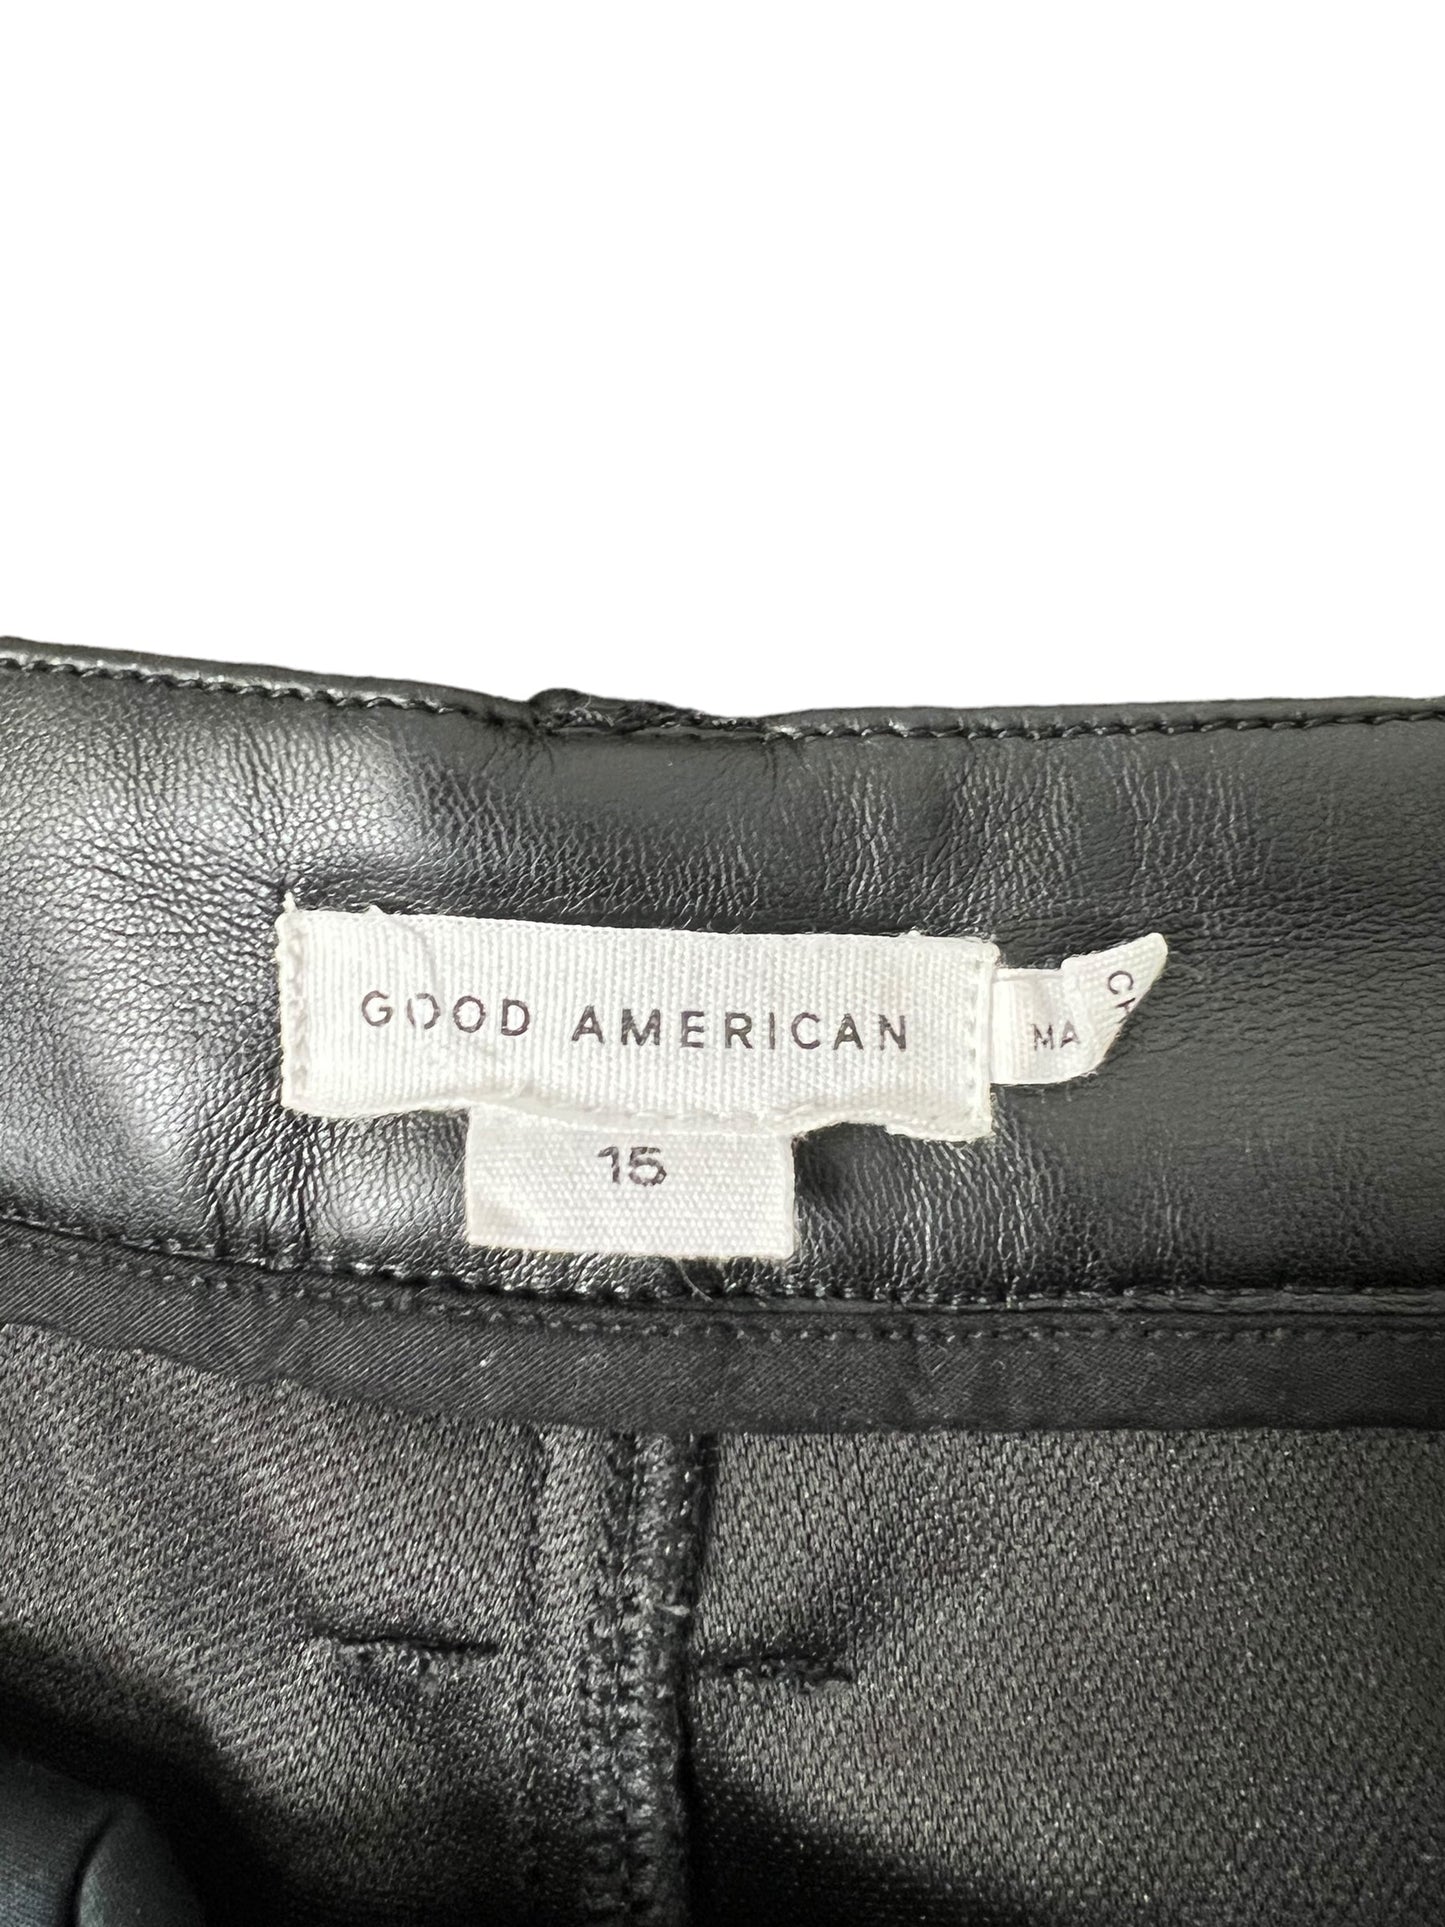 Black Pants Other Good American, Size 16